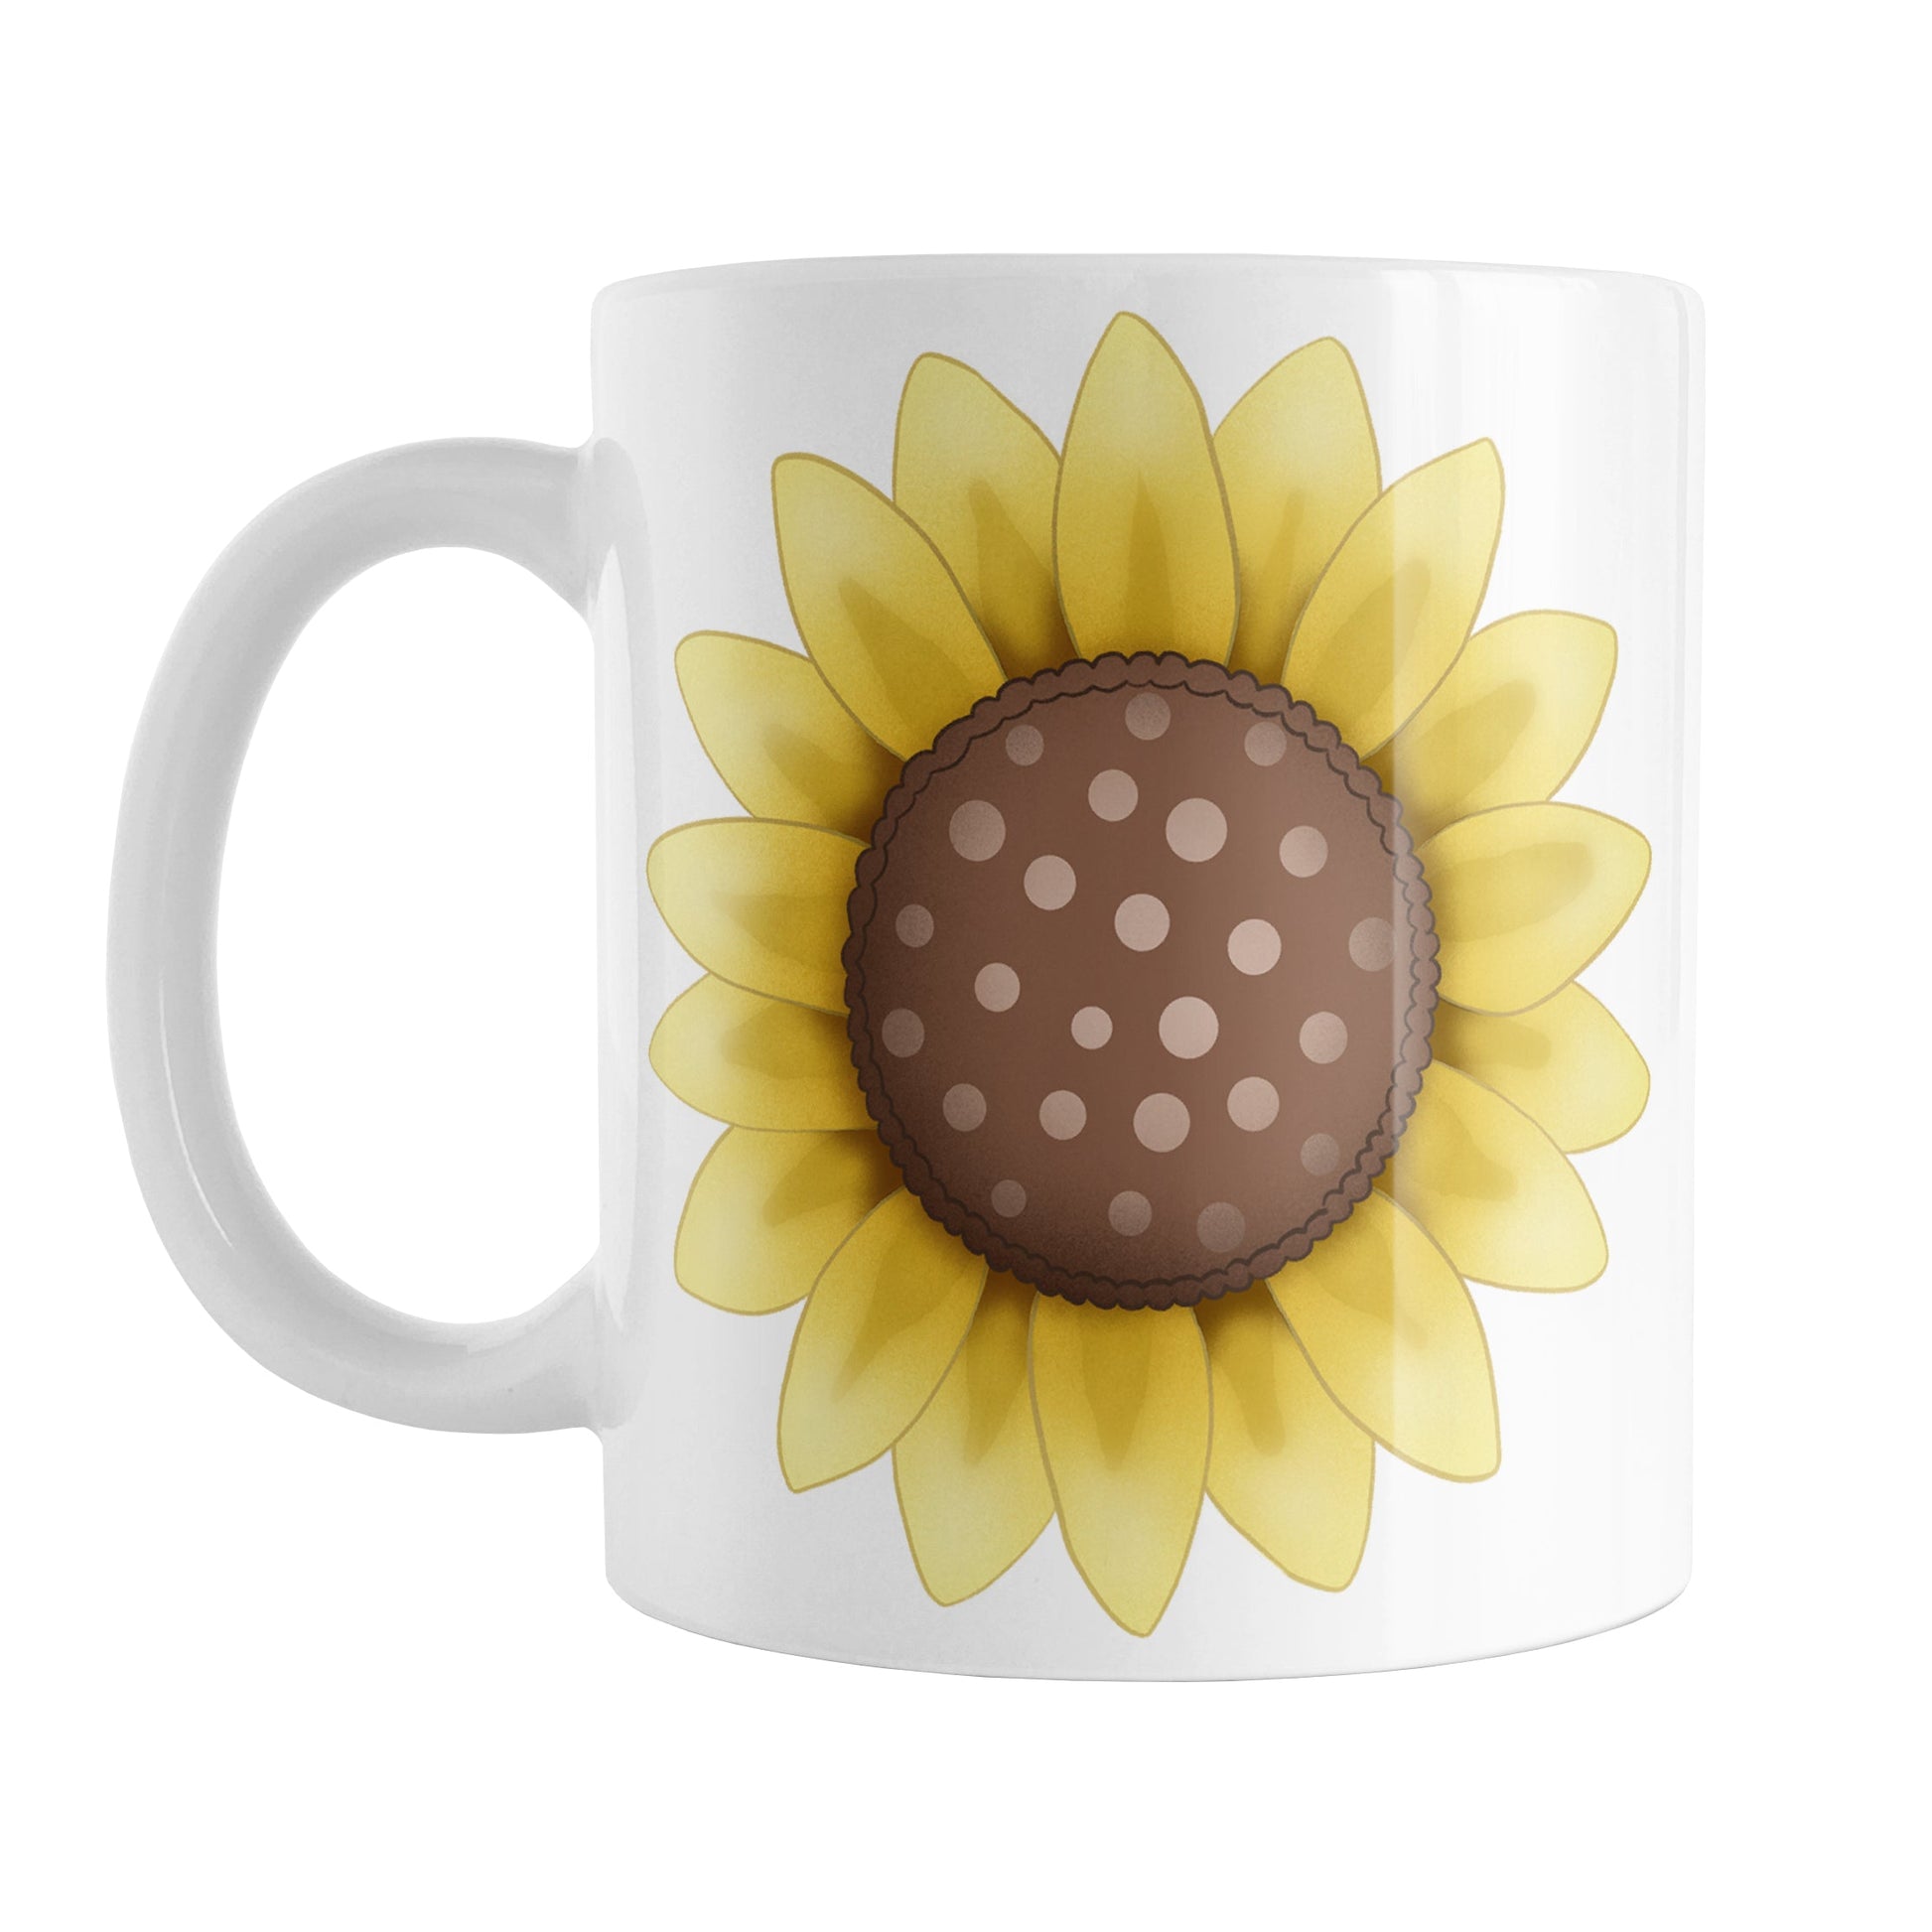 Sunflower Mug (11oz) at Amy's Coffee Mugs. A ceramic coffee mug with a big bright yellow sunflower with a dotted brown center on both sides of the mug. 